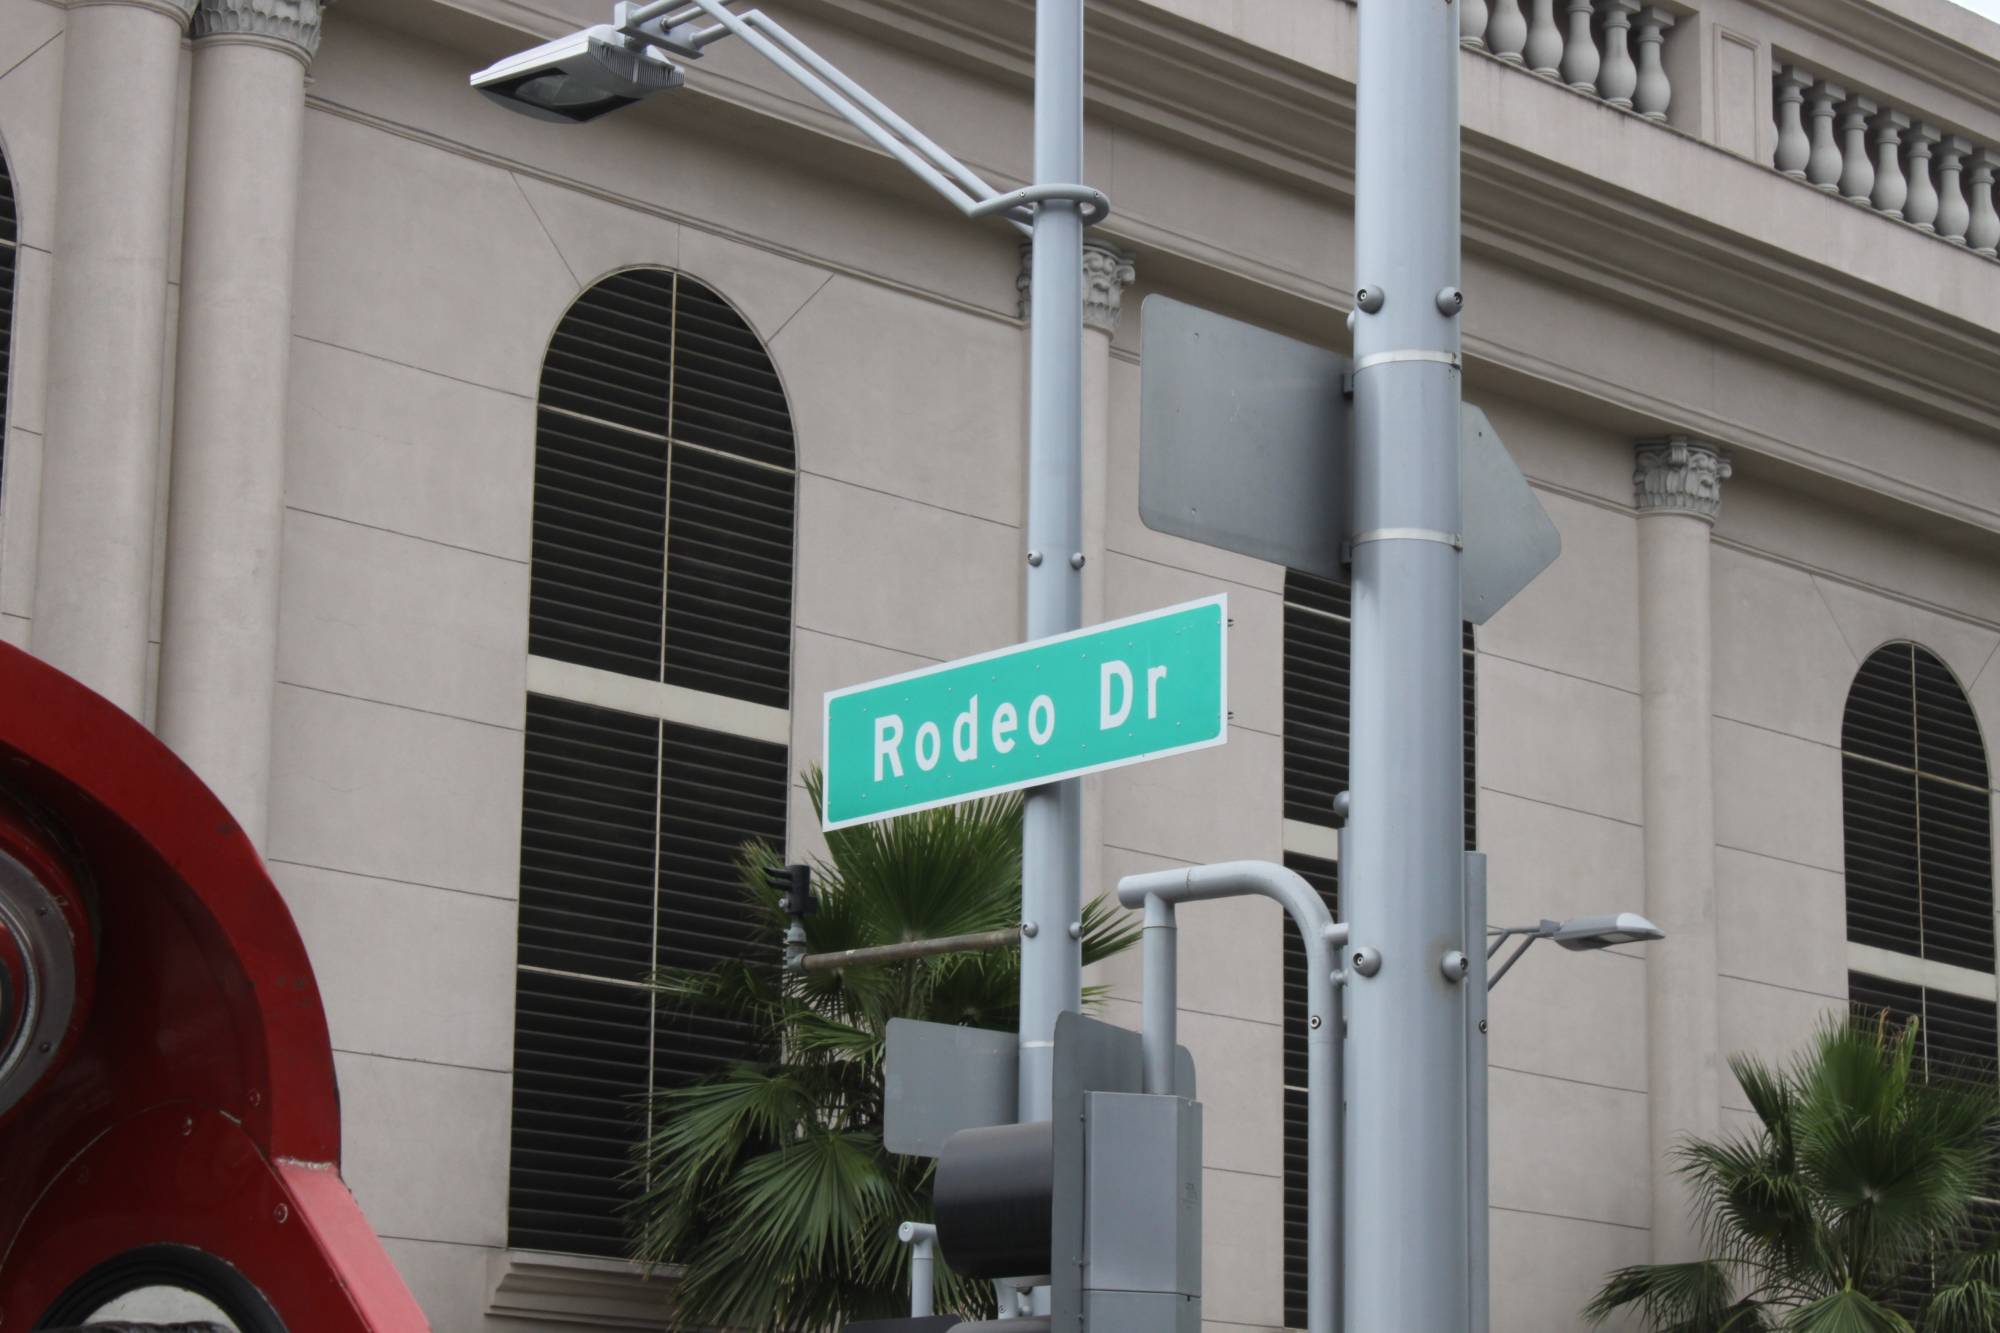 Street sign on Rodeo Drive in Beverly Hills, CA